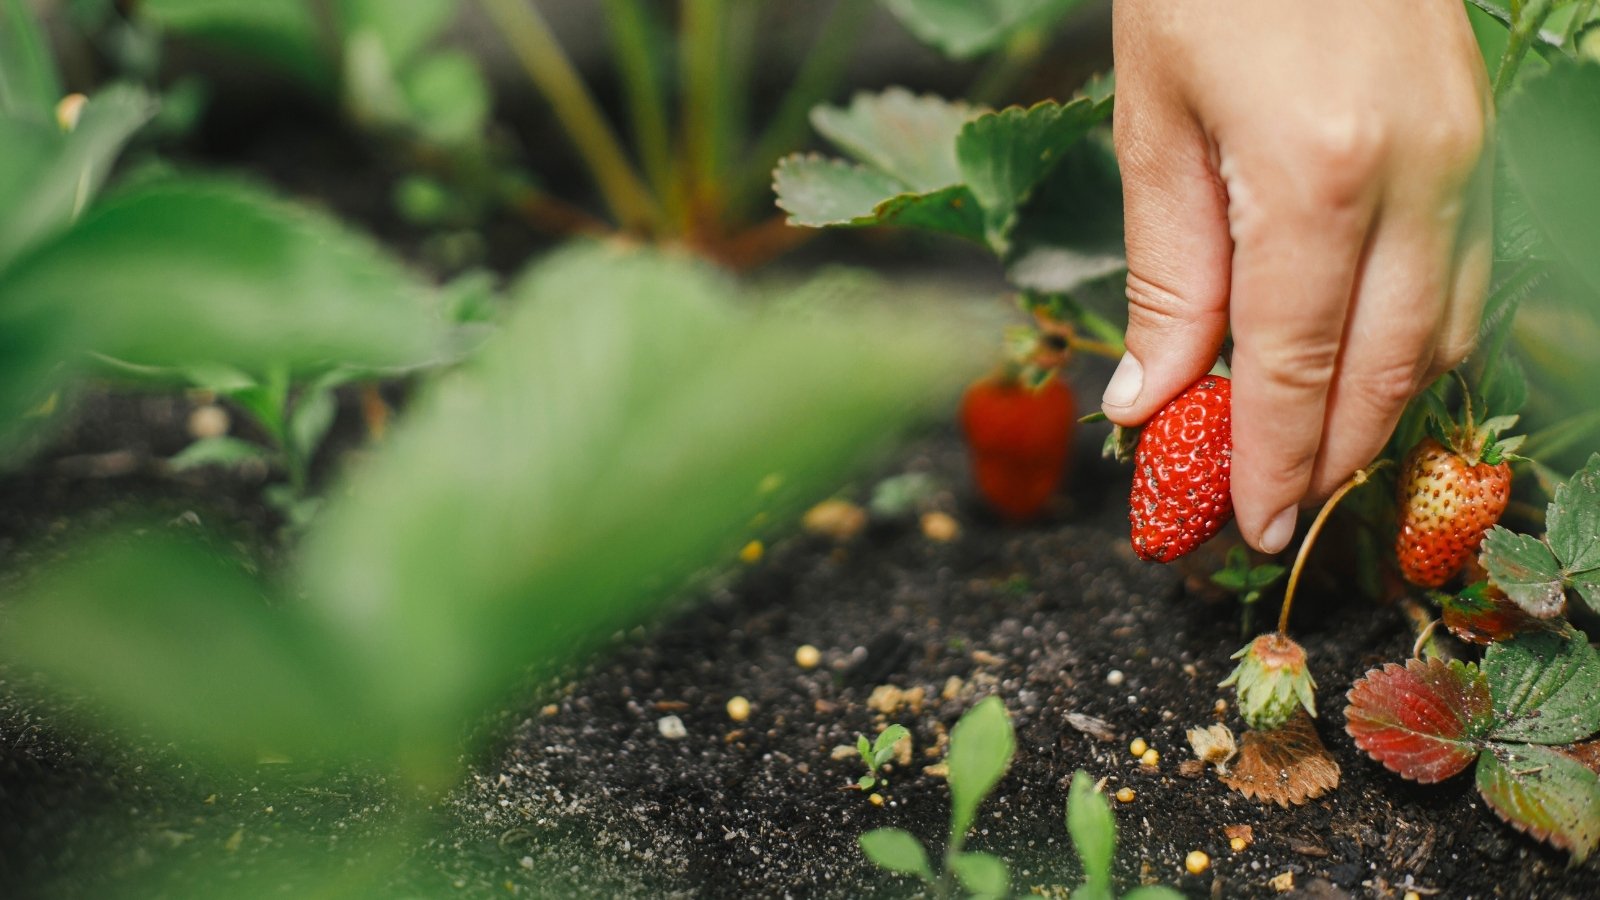 Close-up of a woman's hand harvesting ripe strawberries in a garden bed.